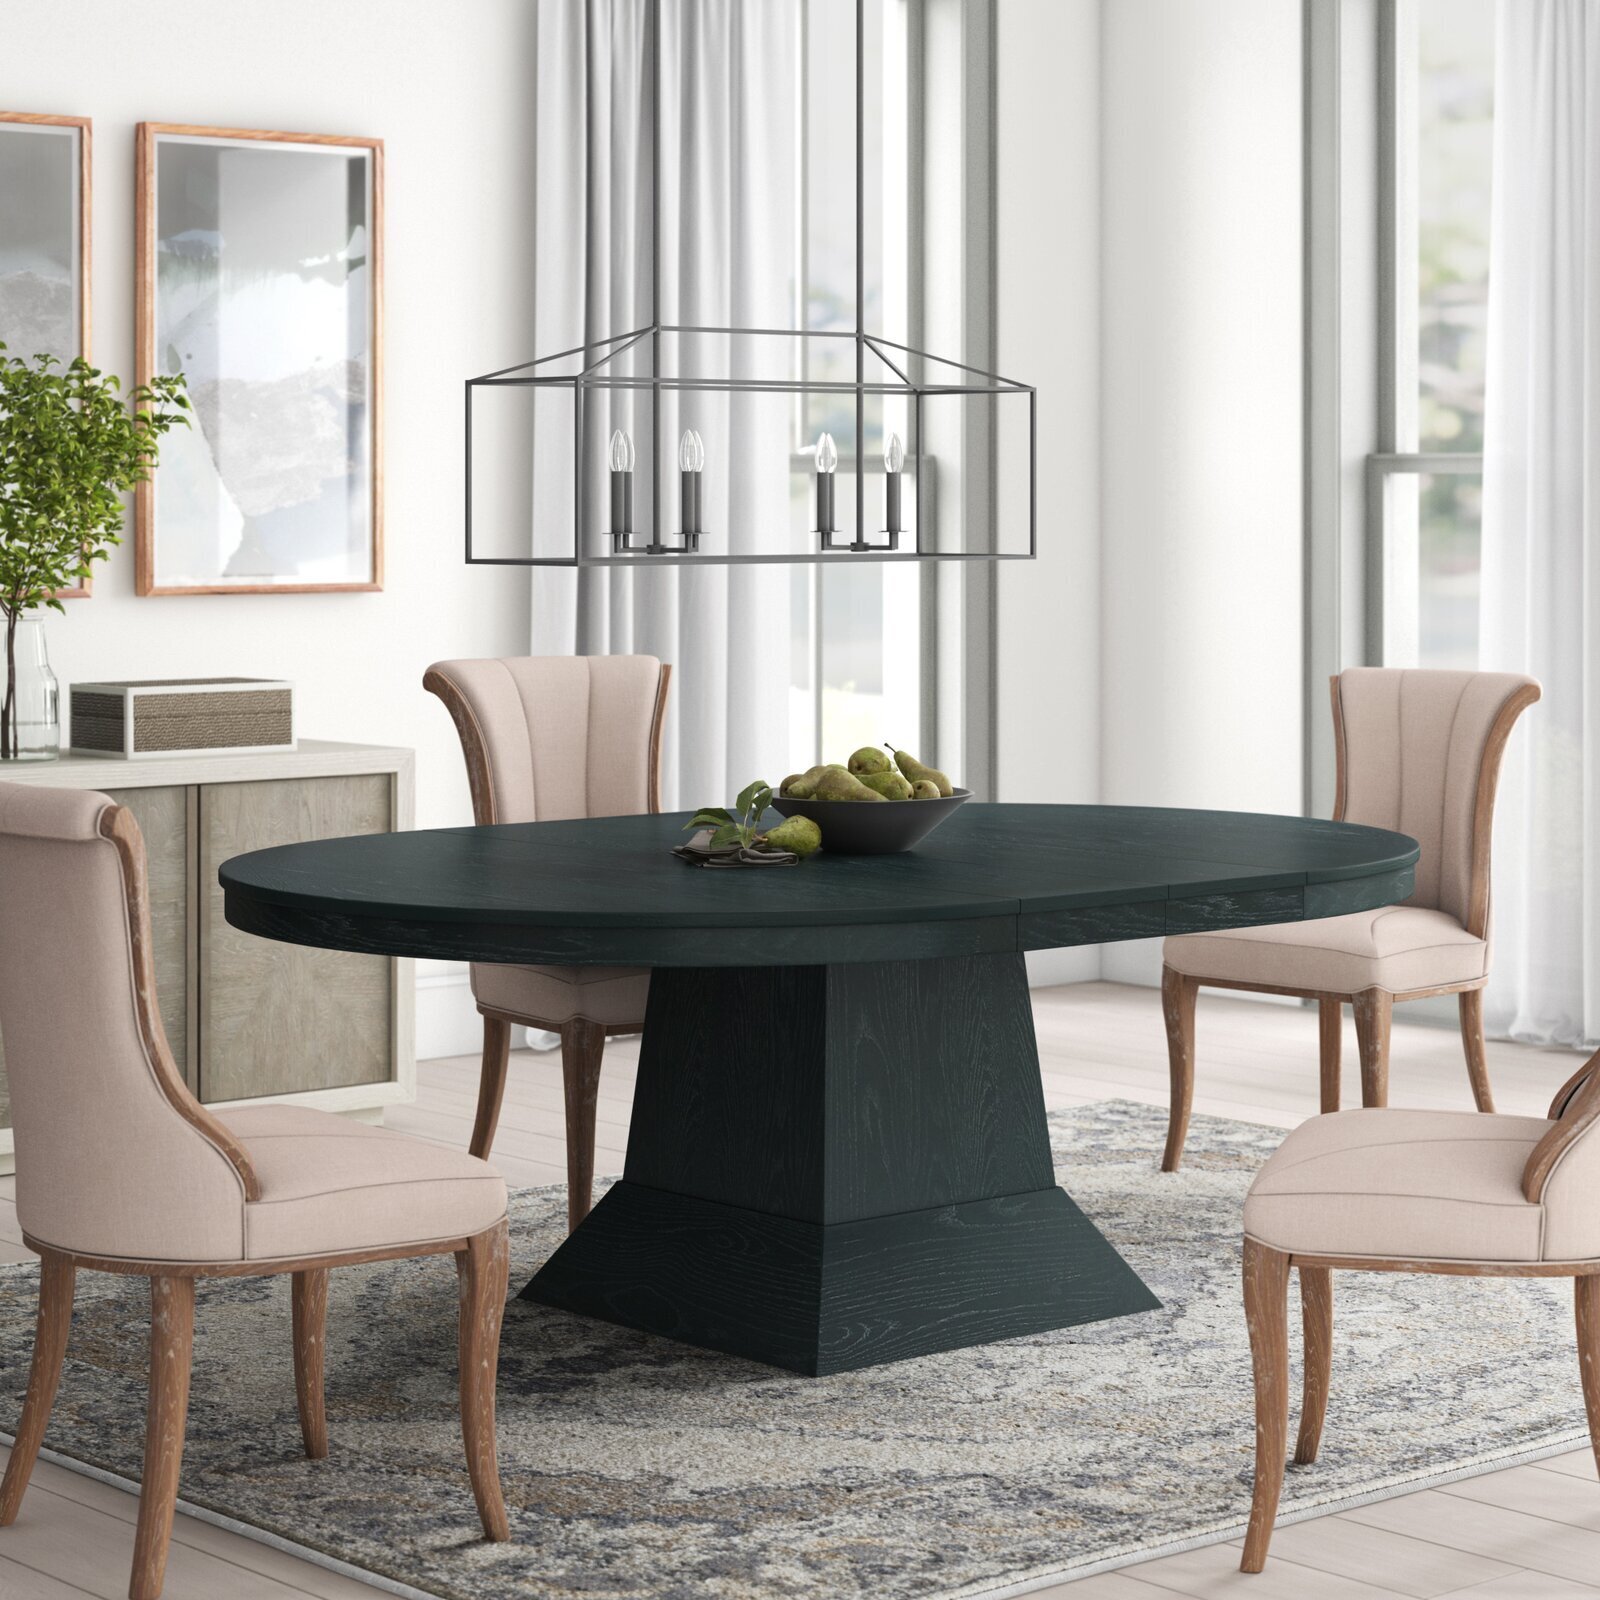 Large Round Dining Table Seats 10 - Ideas on Foter